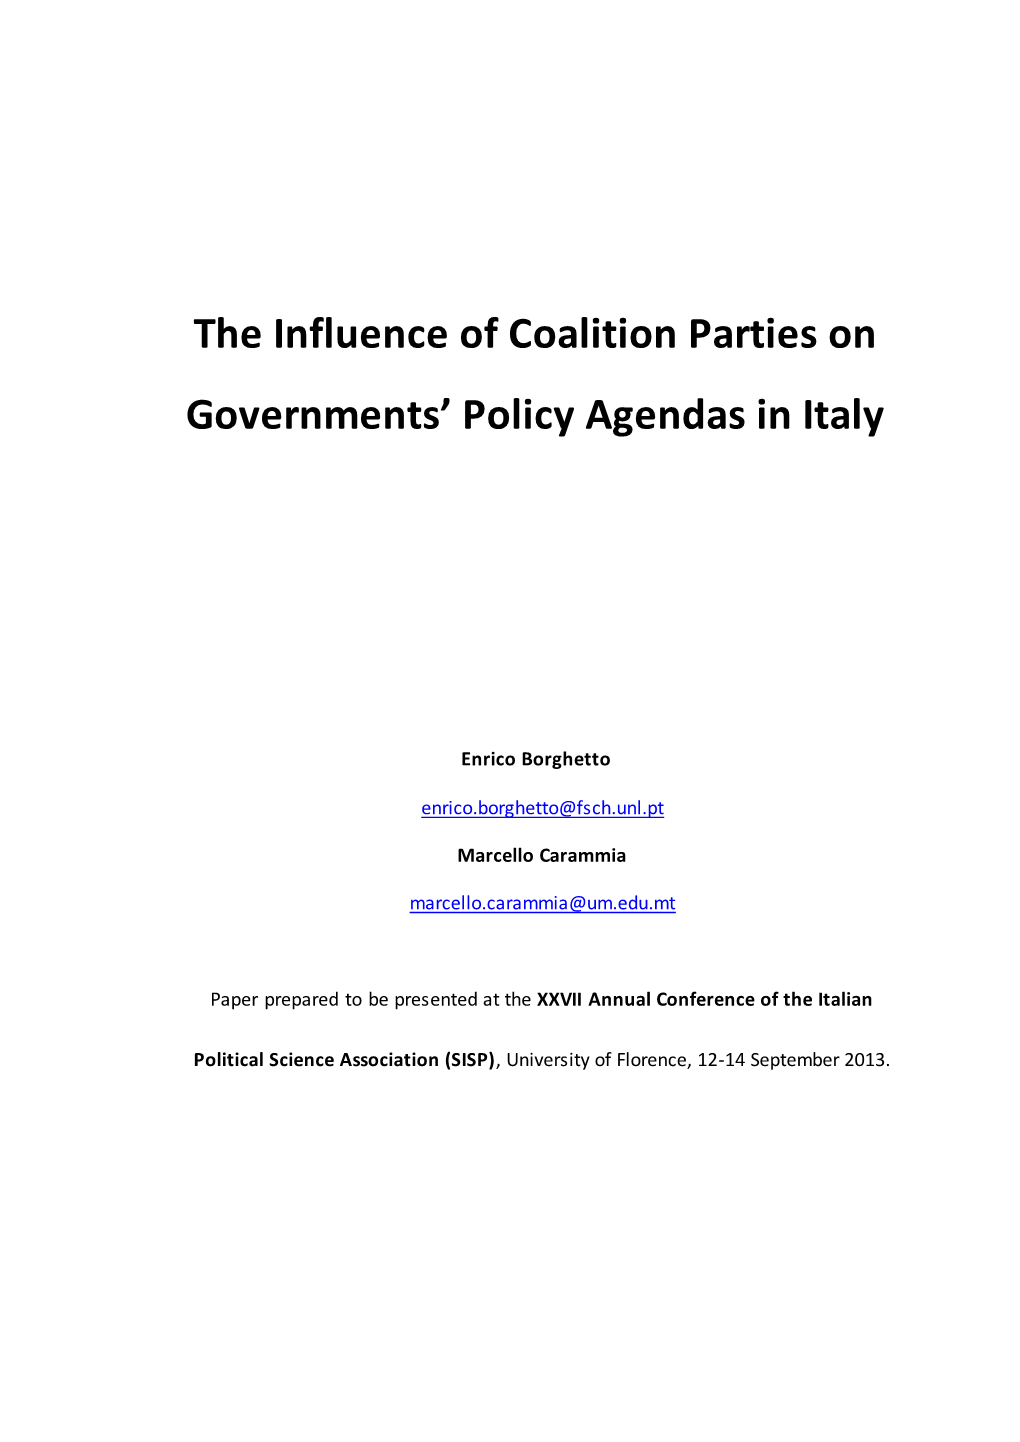 The Influence of Coalition Parties on Governments' Policy Agendas in Italy